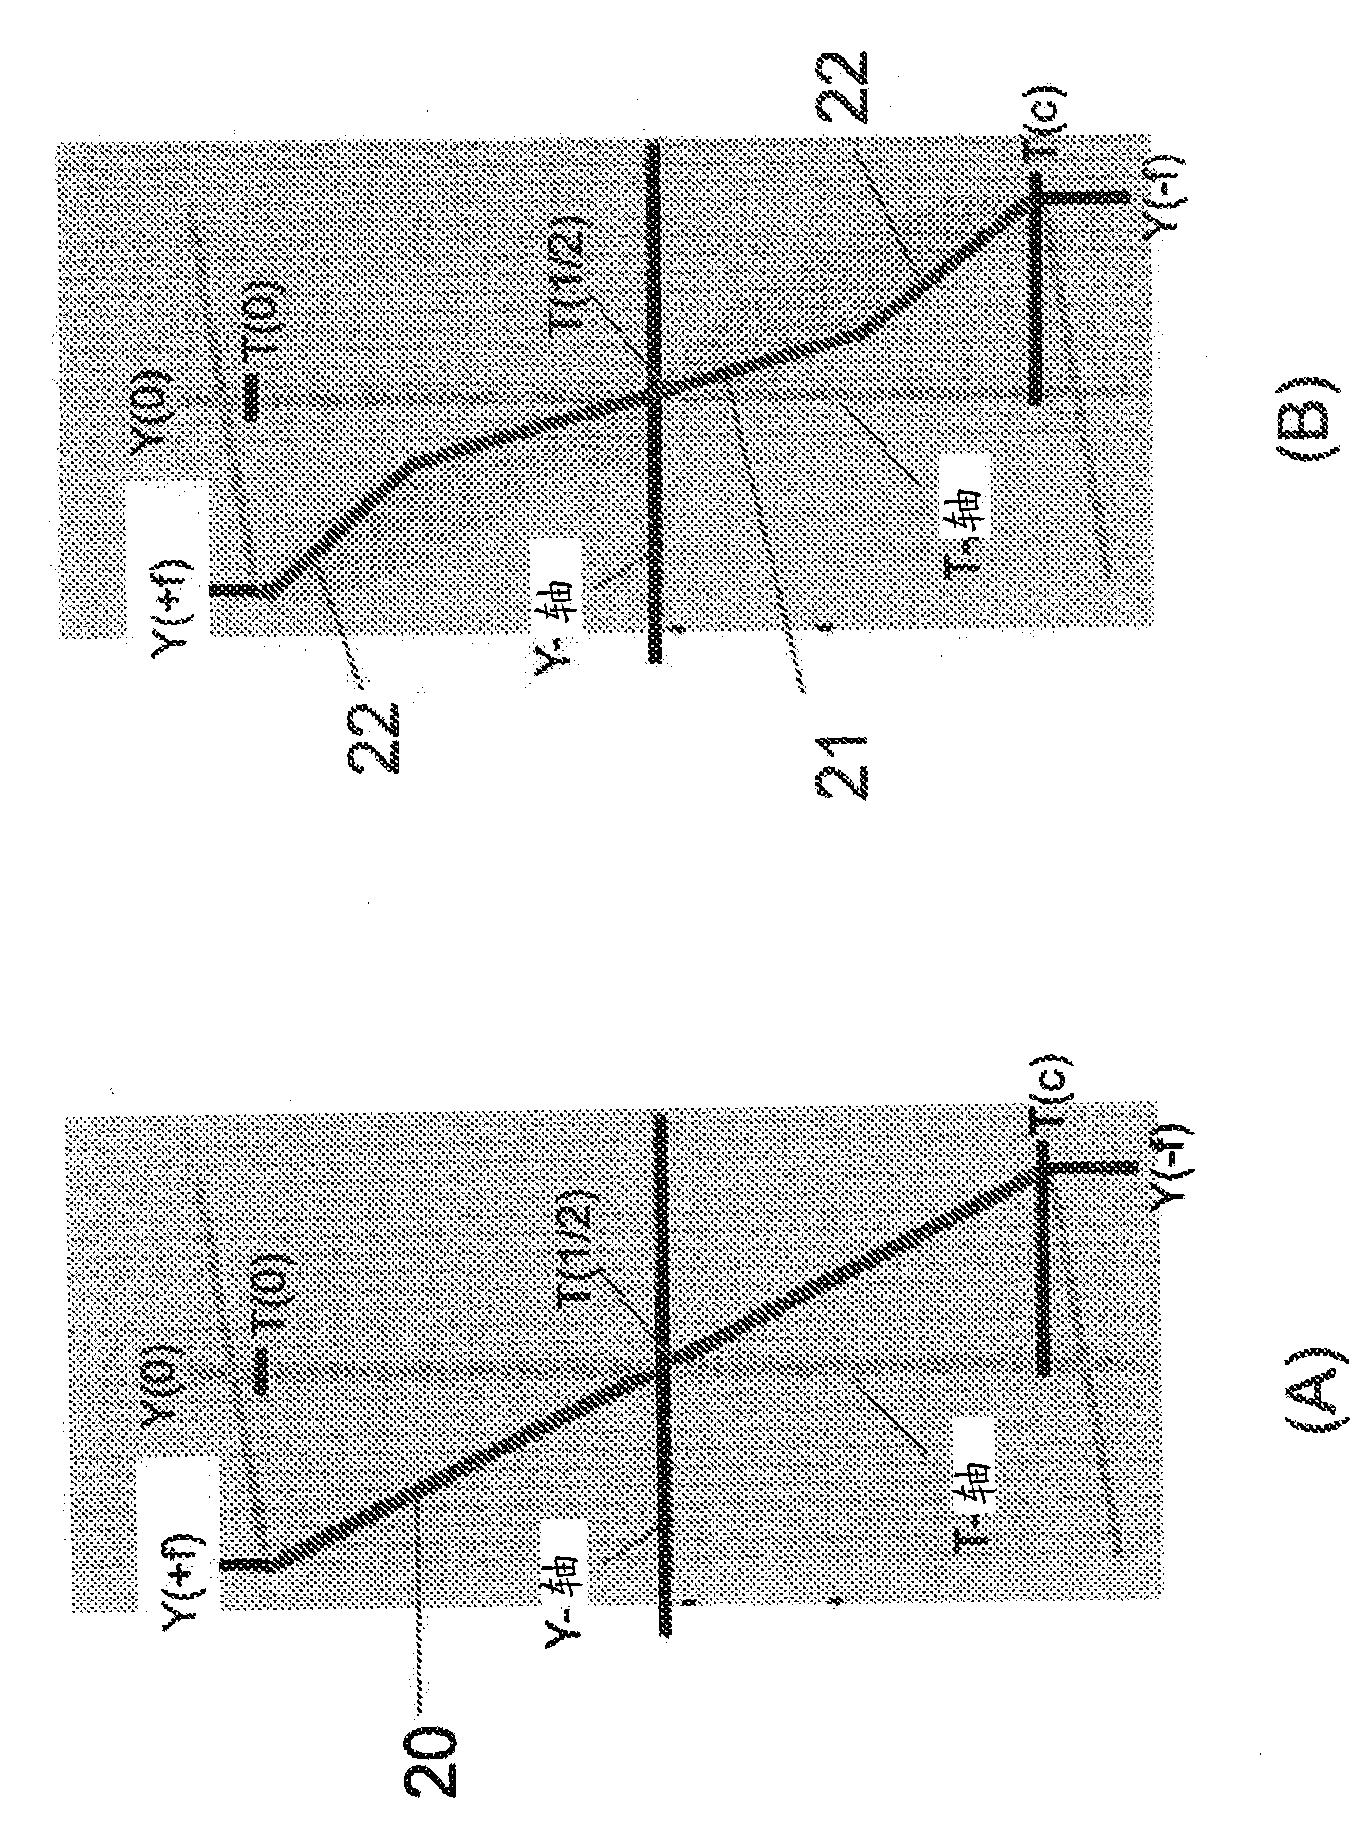 Variable and serrated scanning in laser projectors